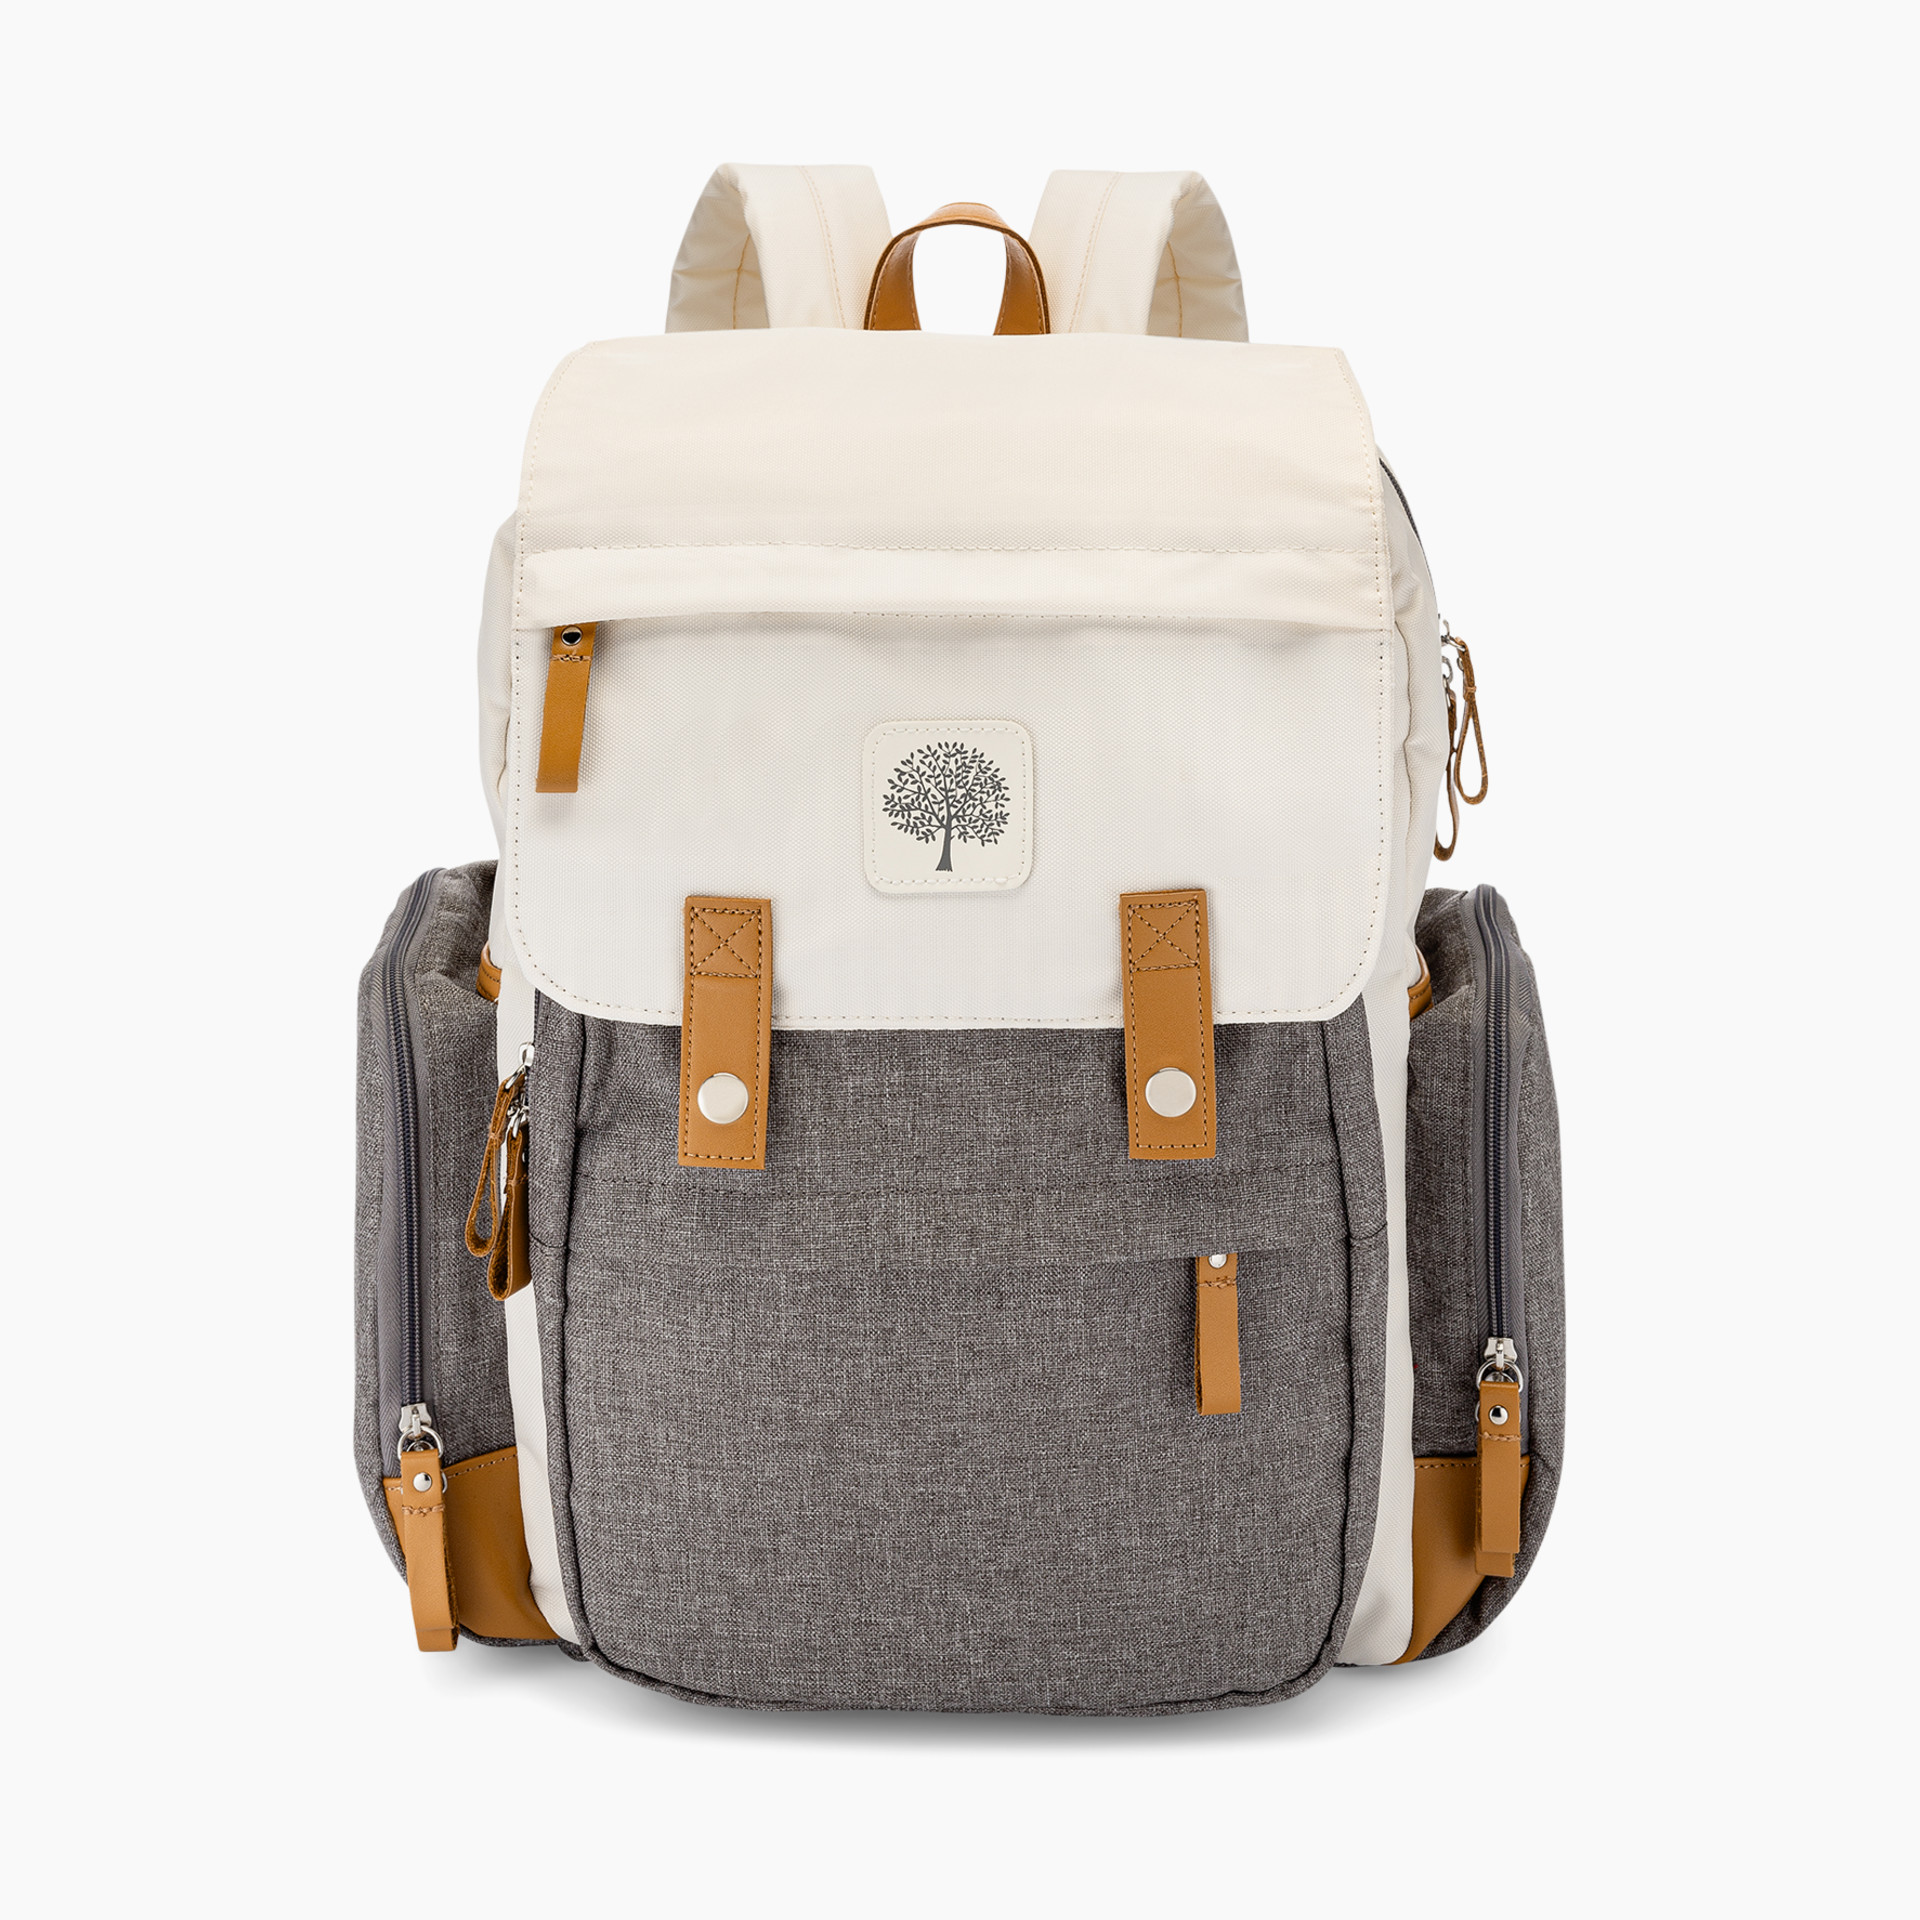 Parker Baby Diaper Backpack with Gray - Stroller Straps & Changing Pad Included - Color Block Cream Birch Bag